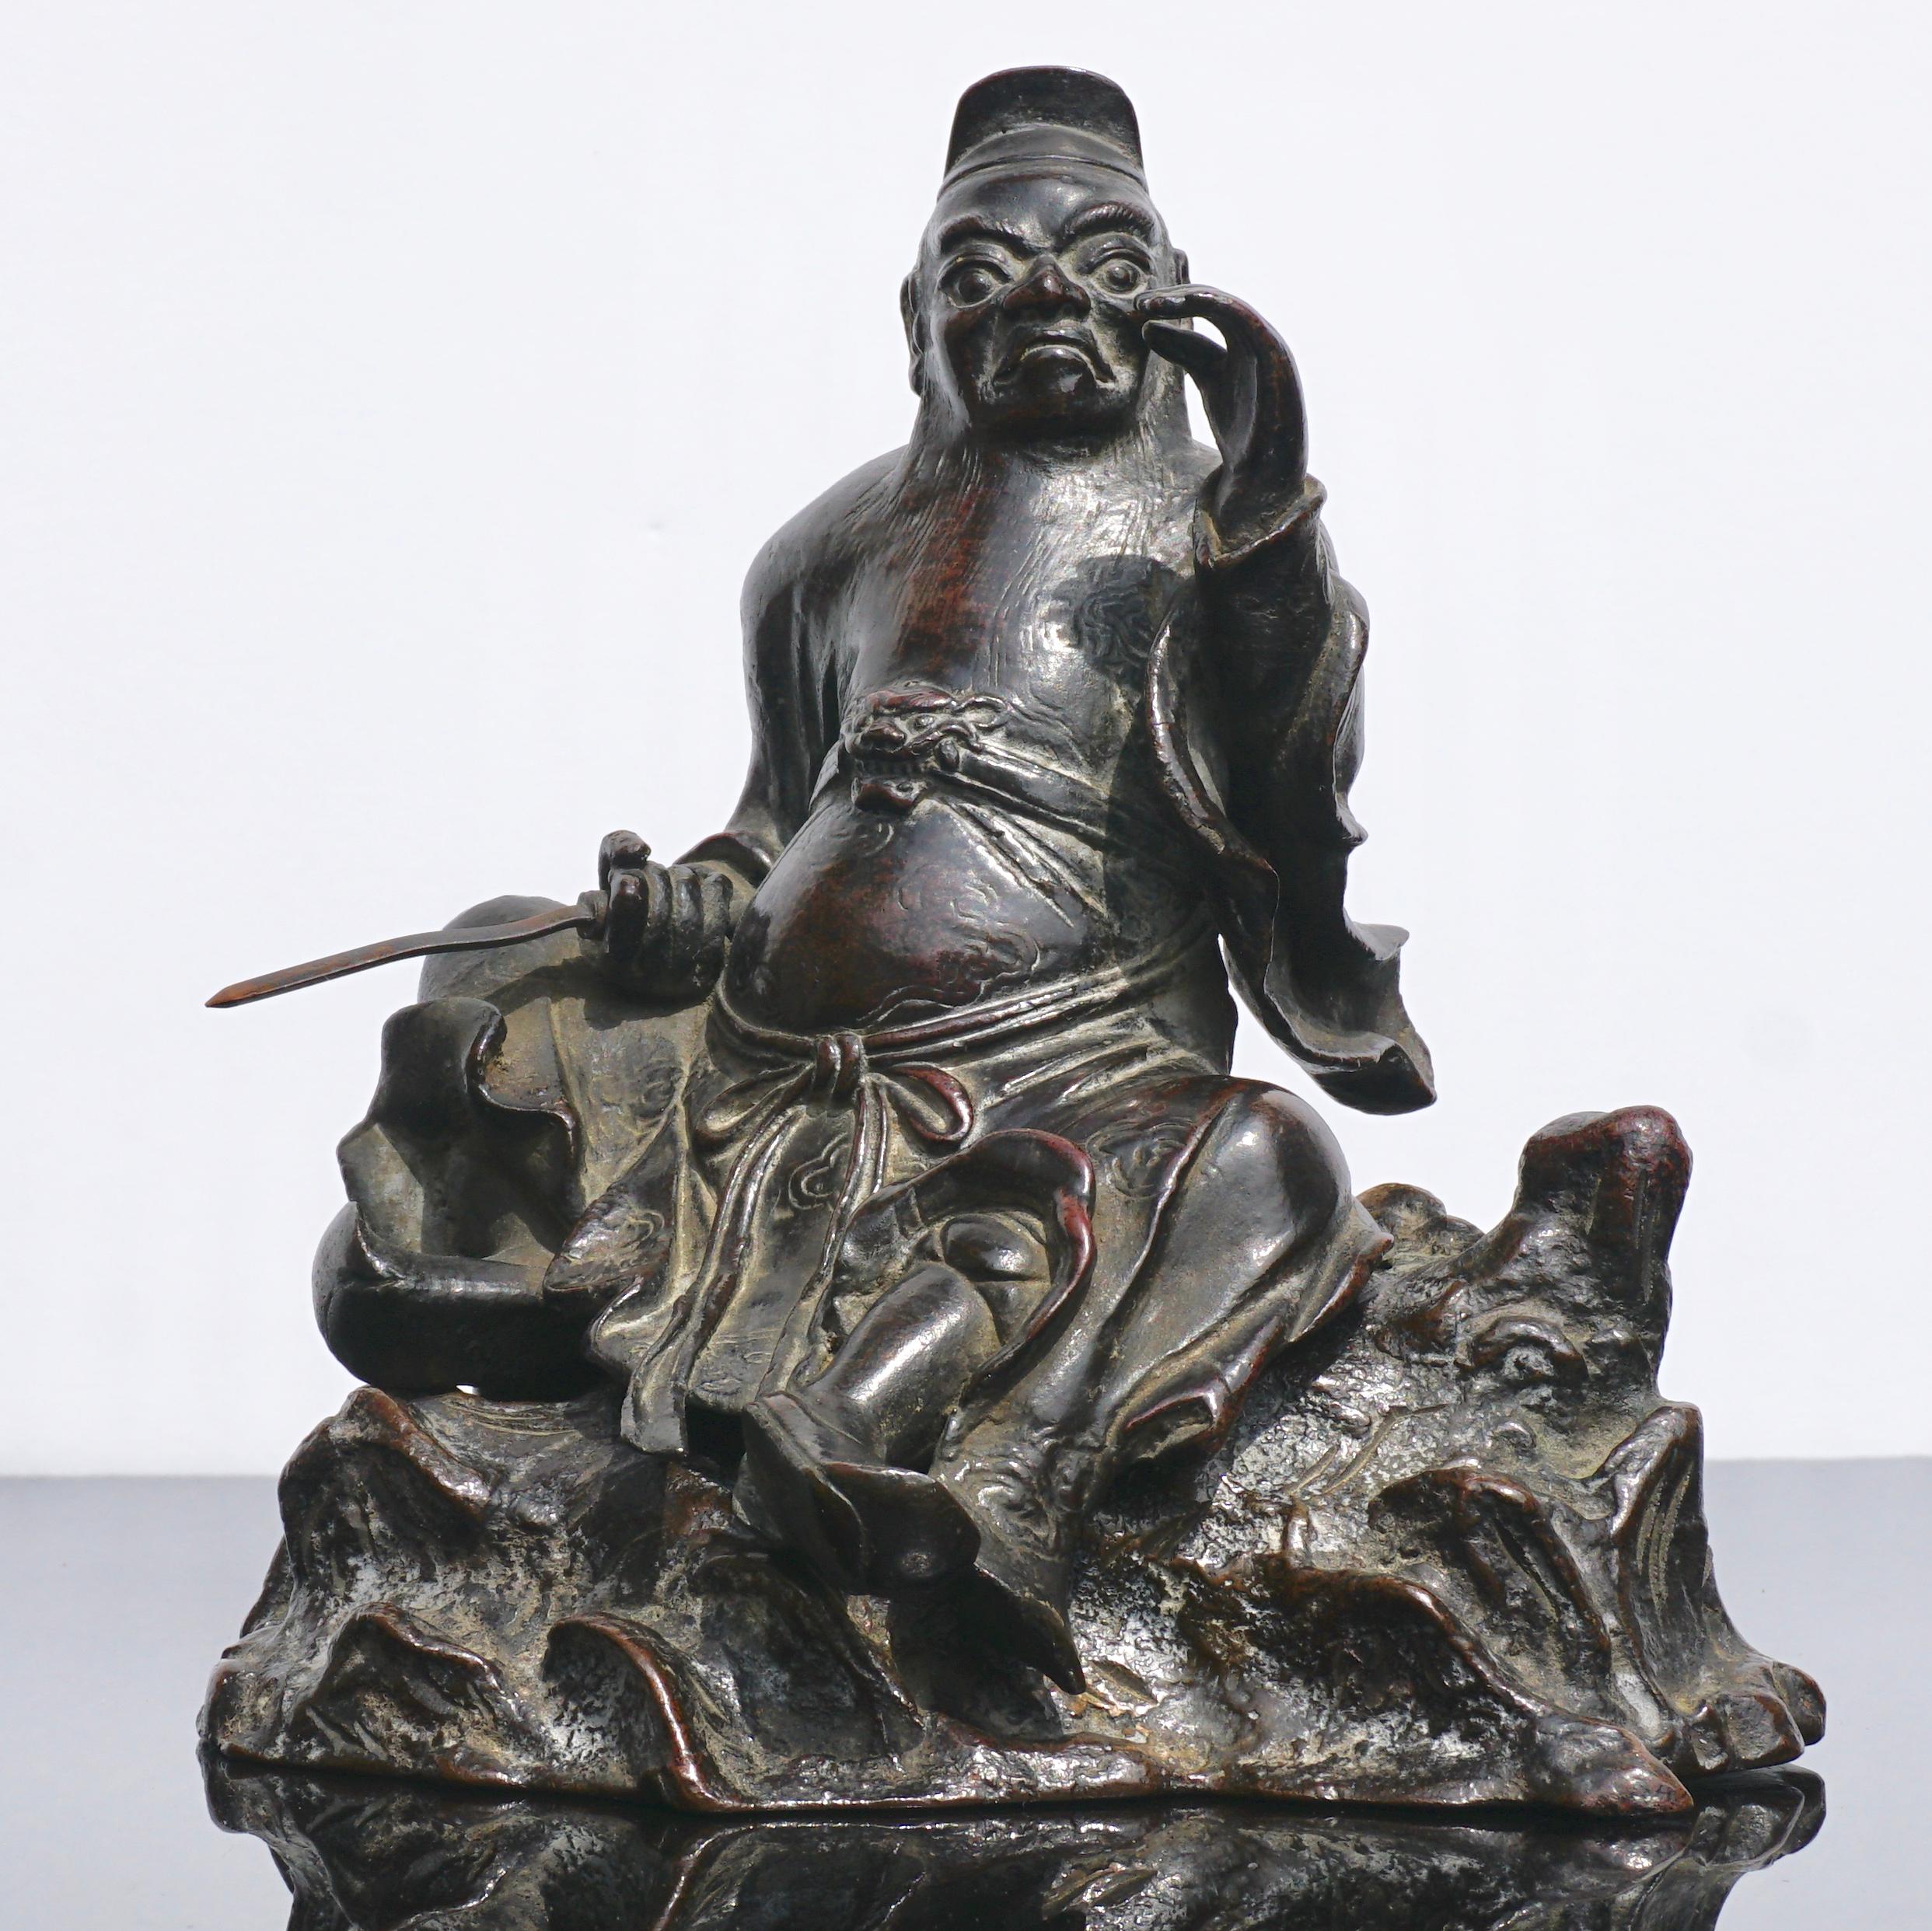 A Chinese Ming dynasty two-piece bronze incense censer or cache in the Form of Guandi or Guan Yu holding a sword in his right hand sitting on a natural boulder. The sculpture or figure with a hat, long beard is elegantly robed with a lion or tiger